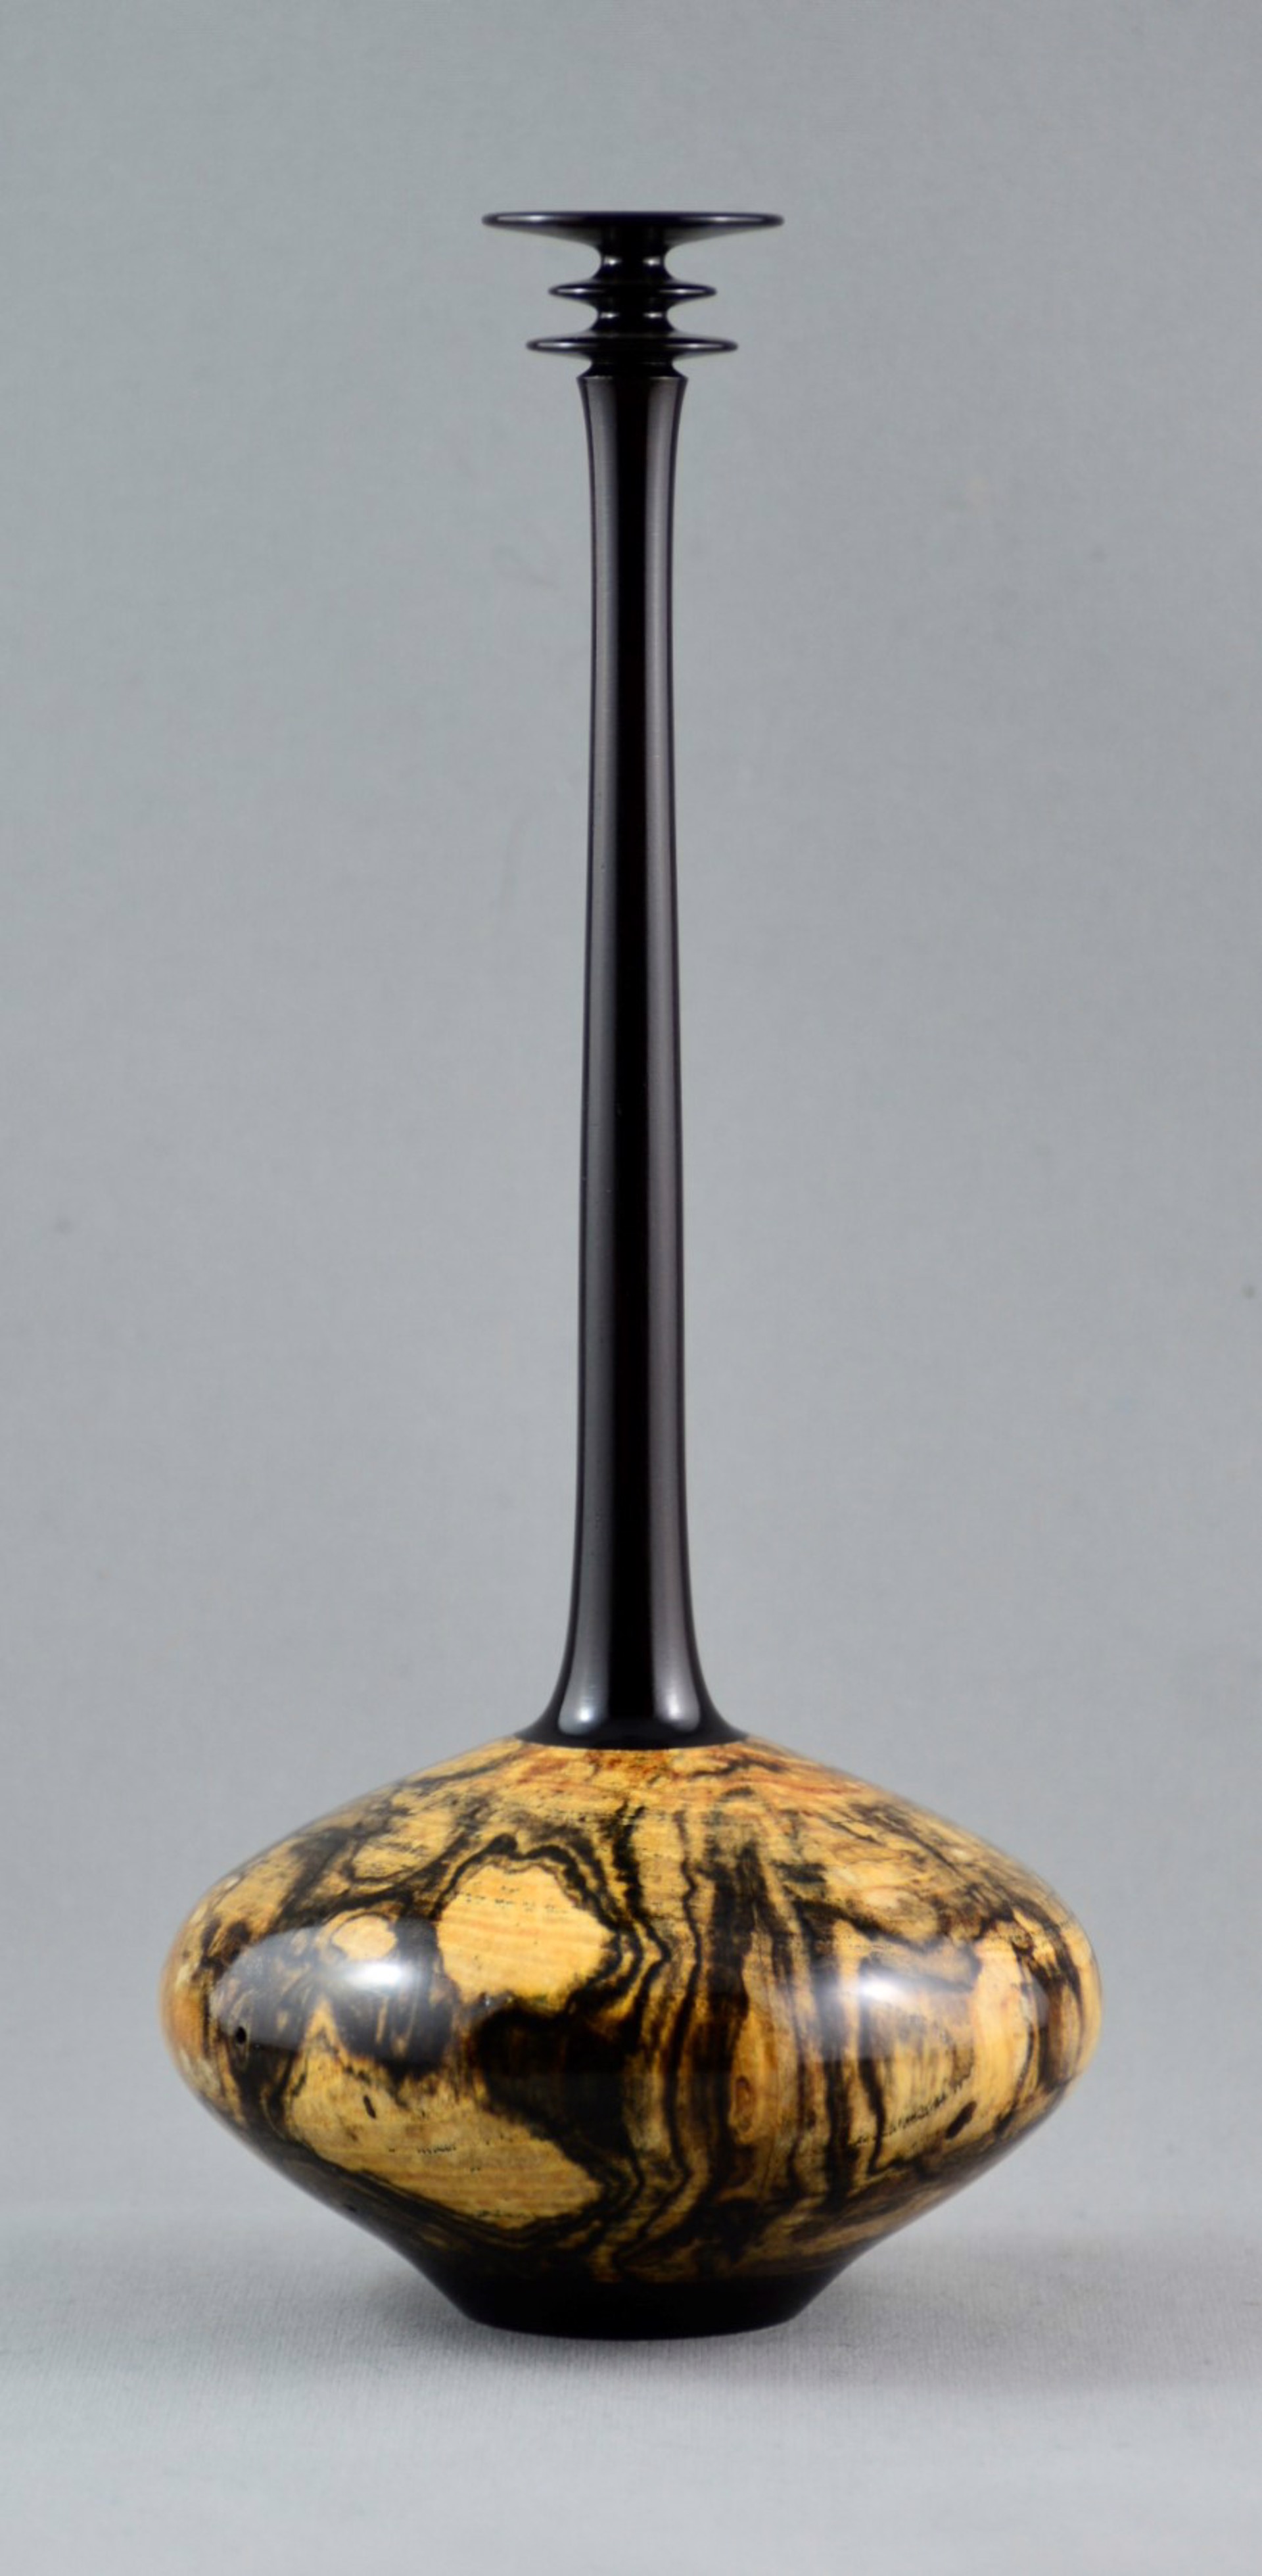 Blackwood and Spalted Ash Vase by Paul Gray Diamond